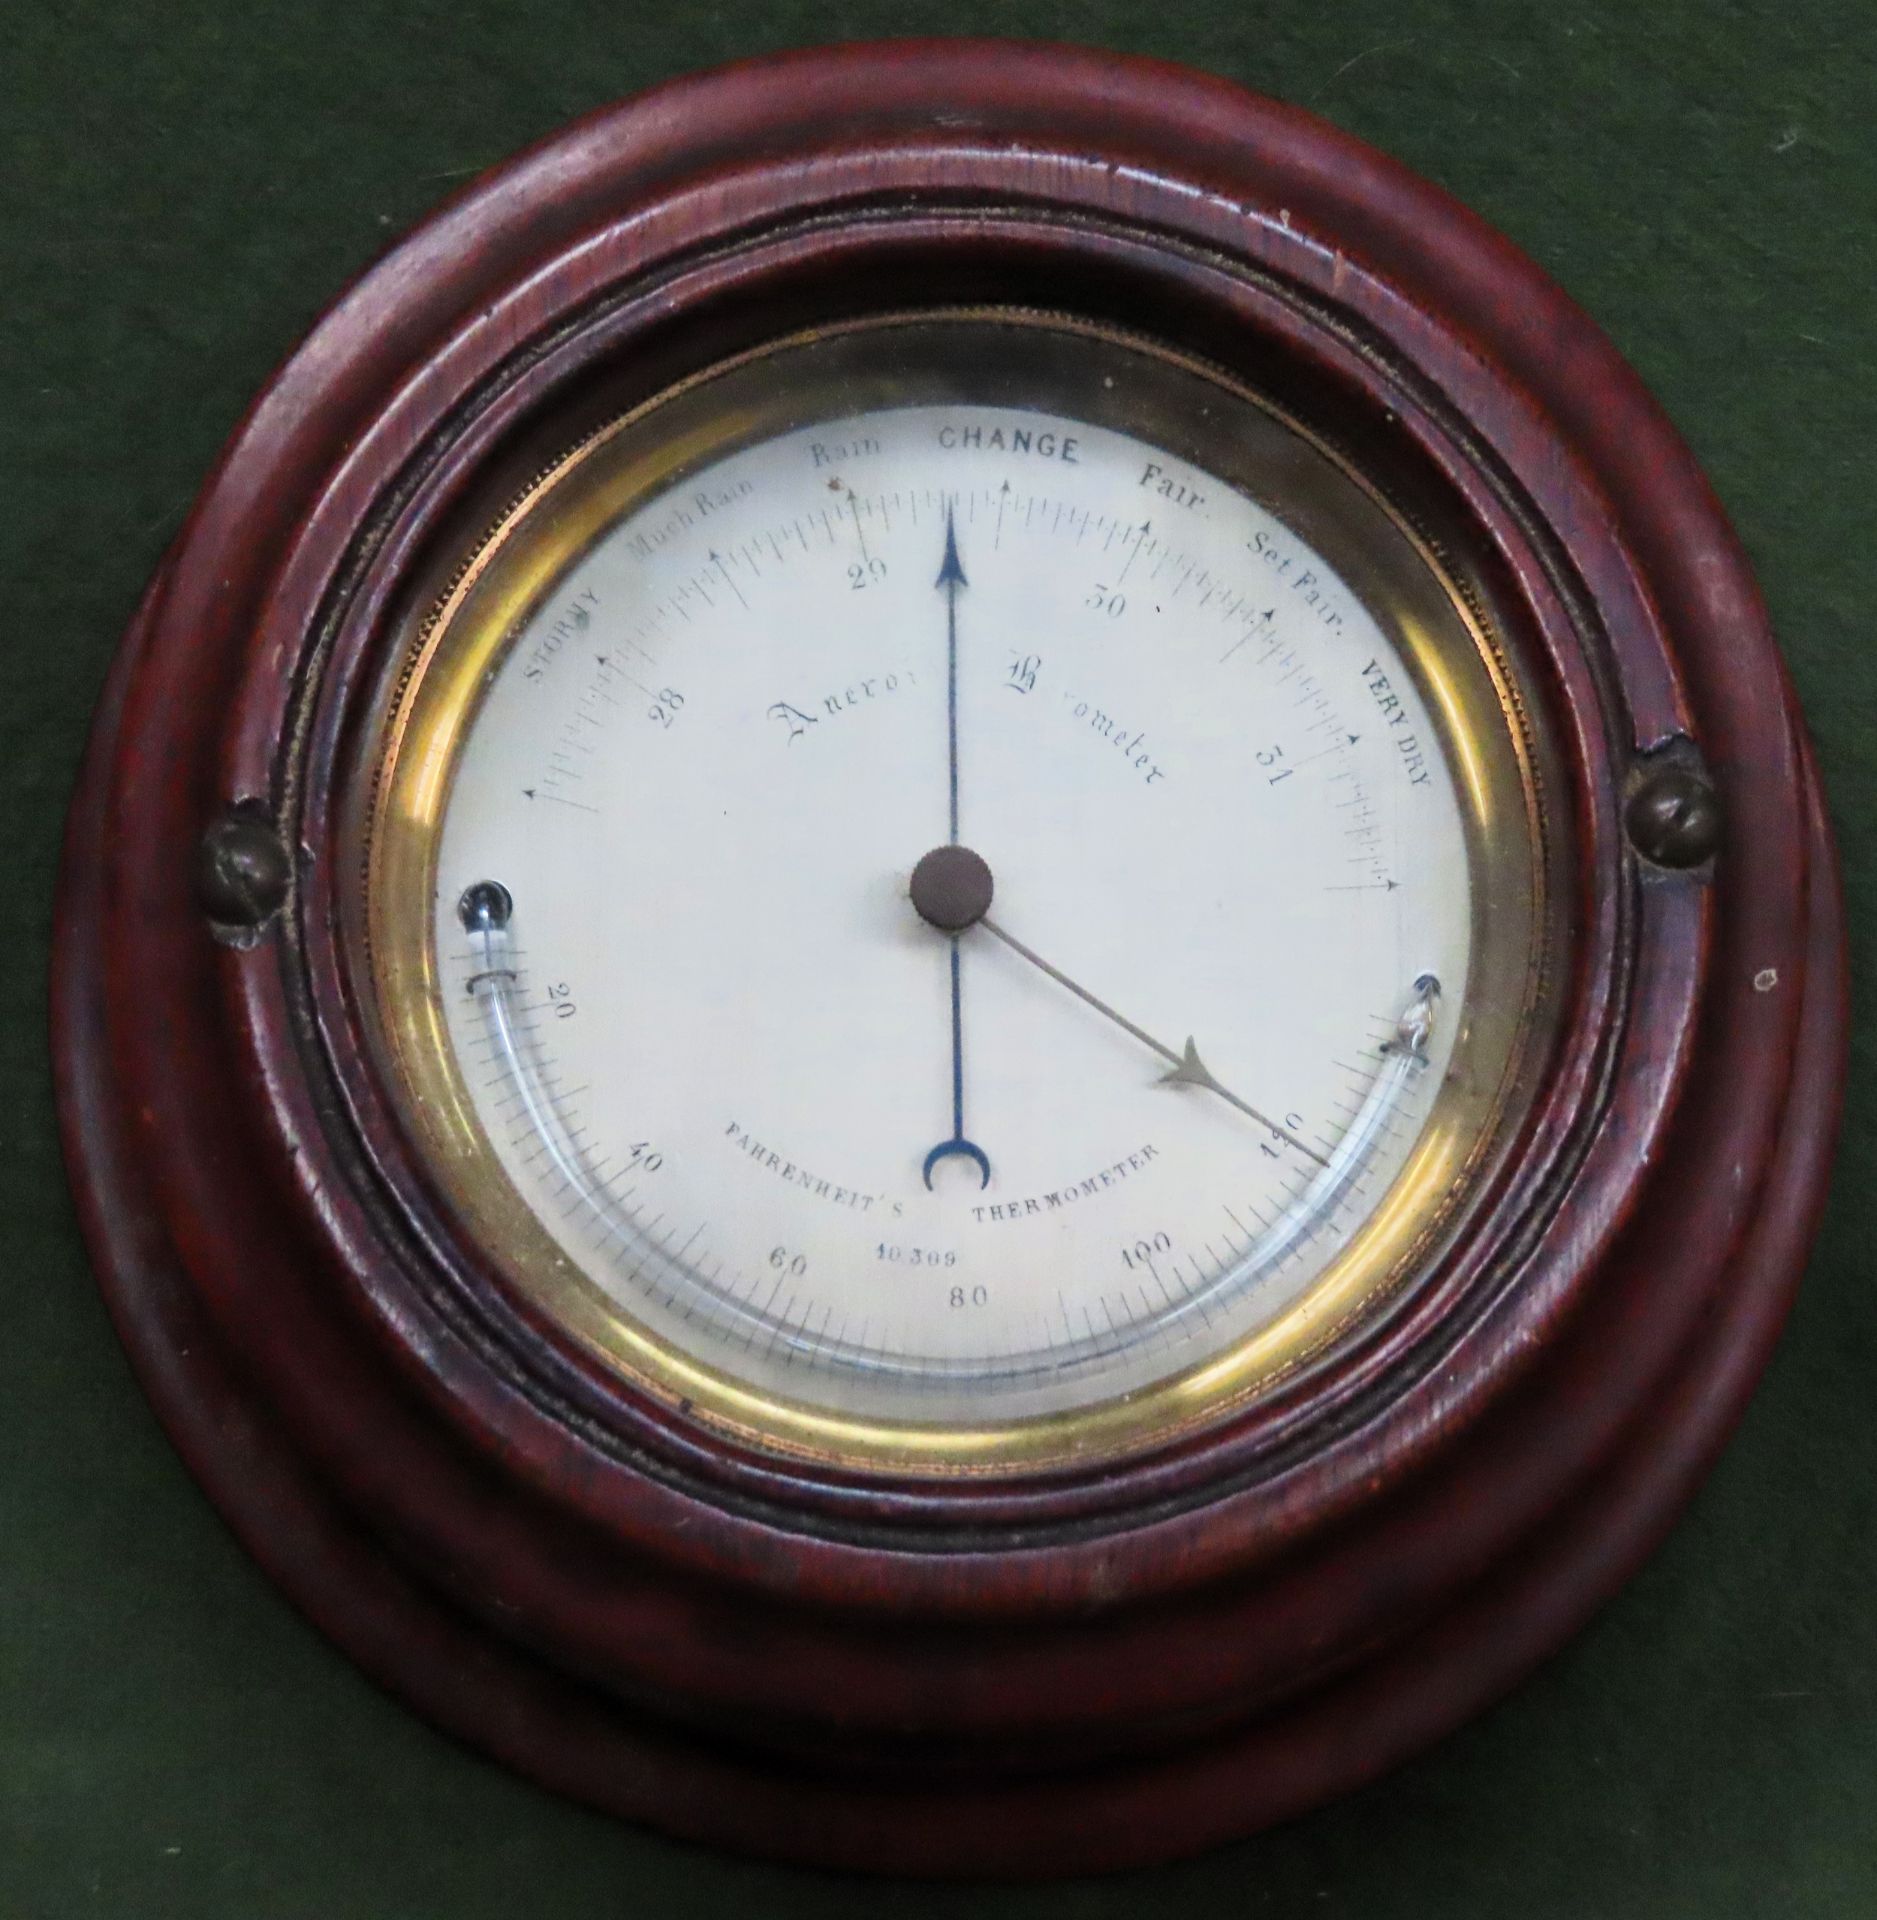 Vintage wooden cased brass farenheit's thermometer/barometer, plus 20th century sextral alarm clock